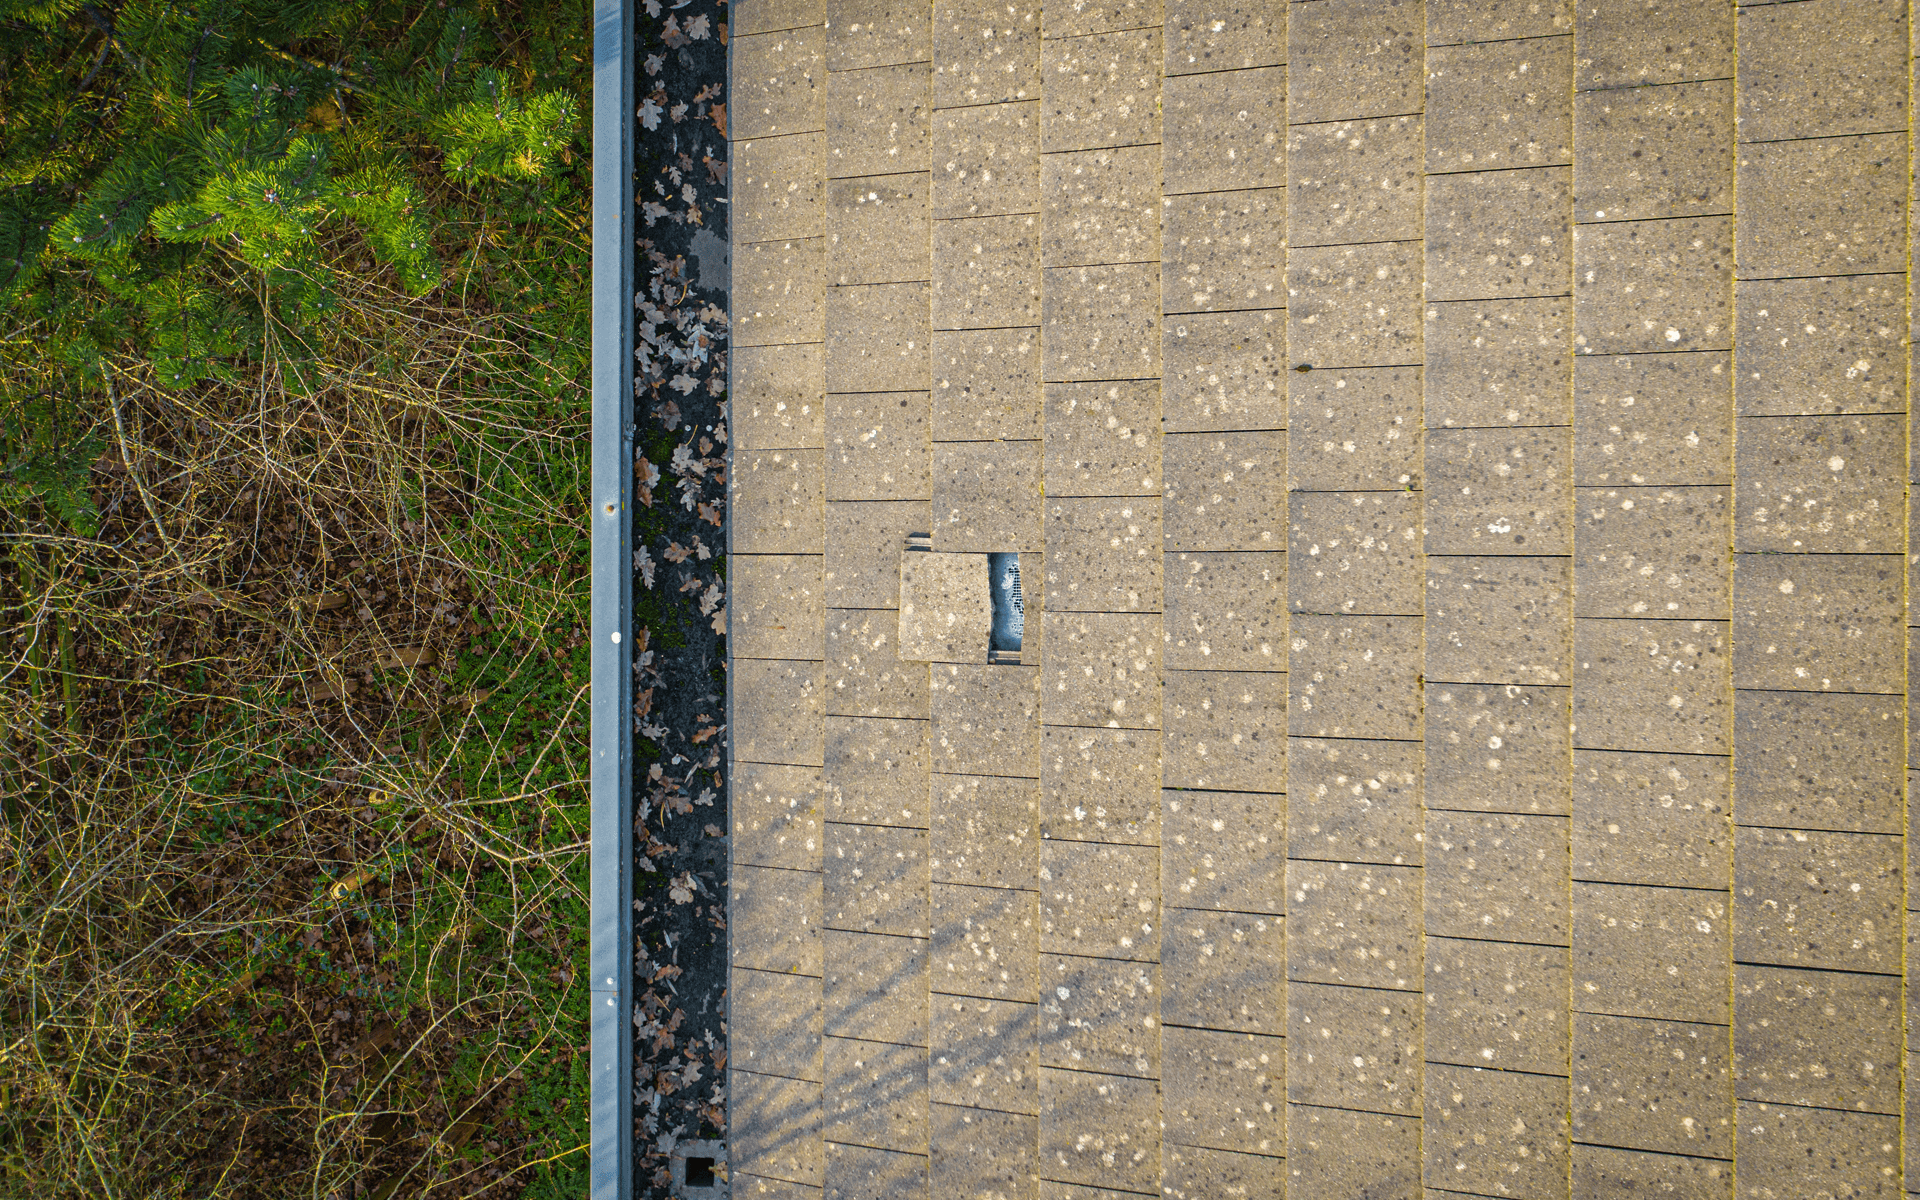 "Mavic 2 Pro" aerial drone photo for a roof survey of a commercial building at Emersons Green, Bristol